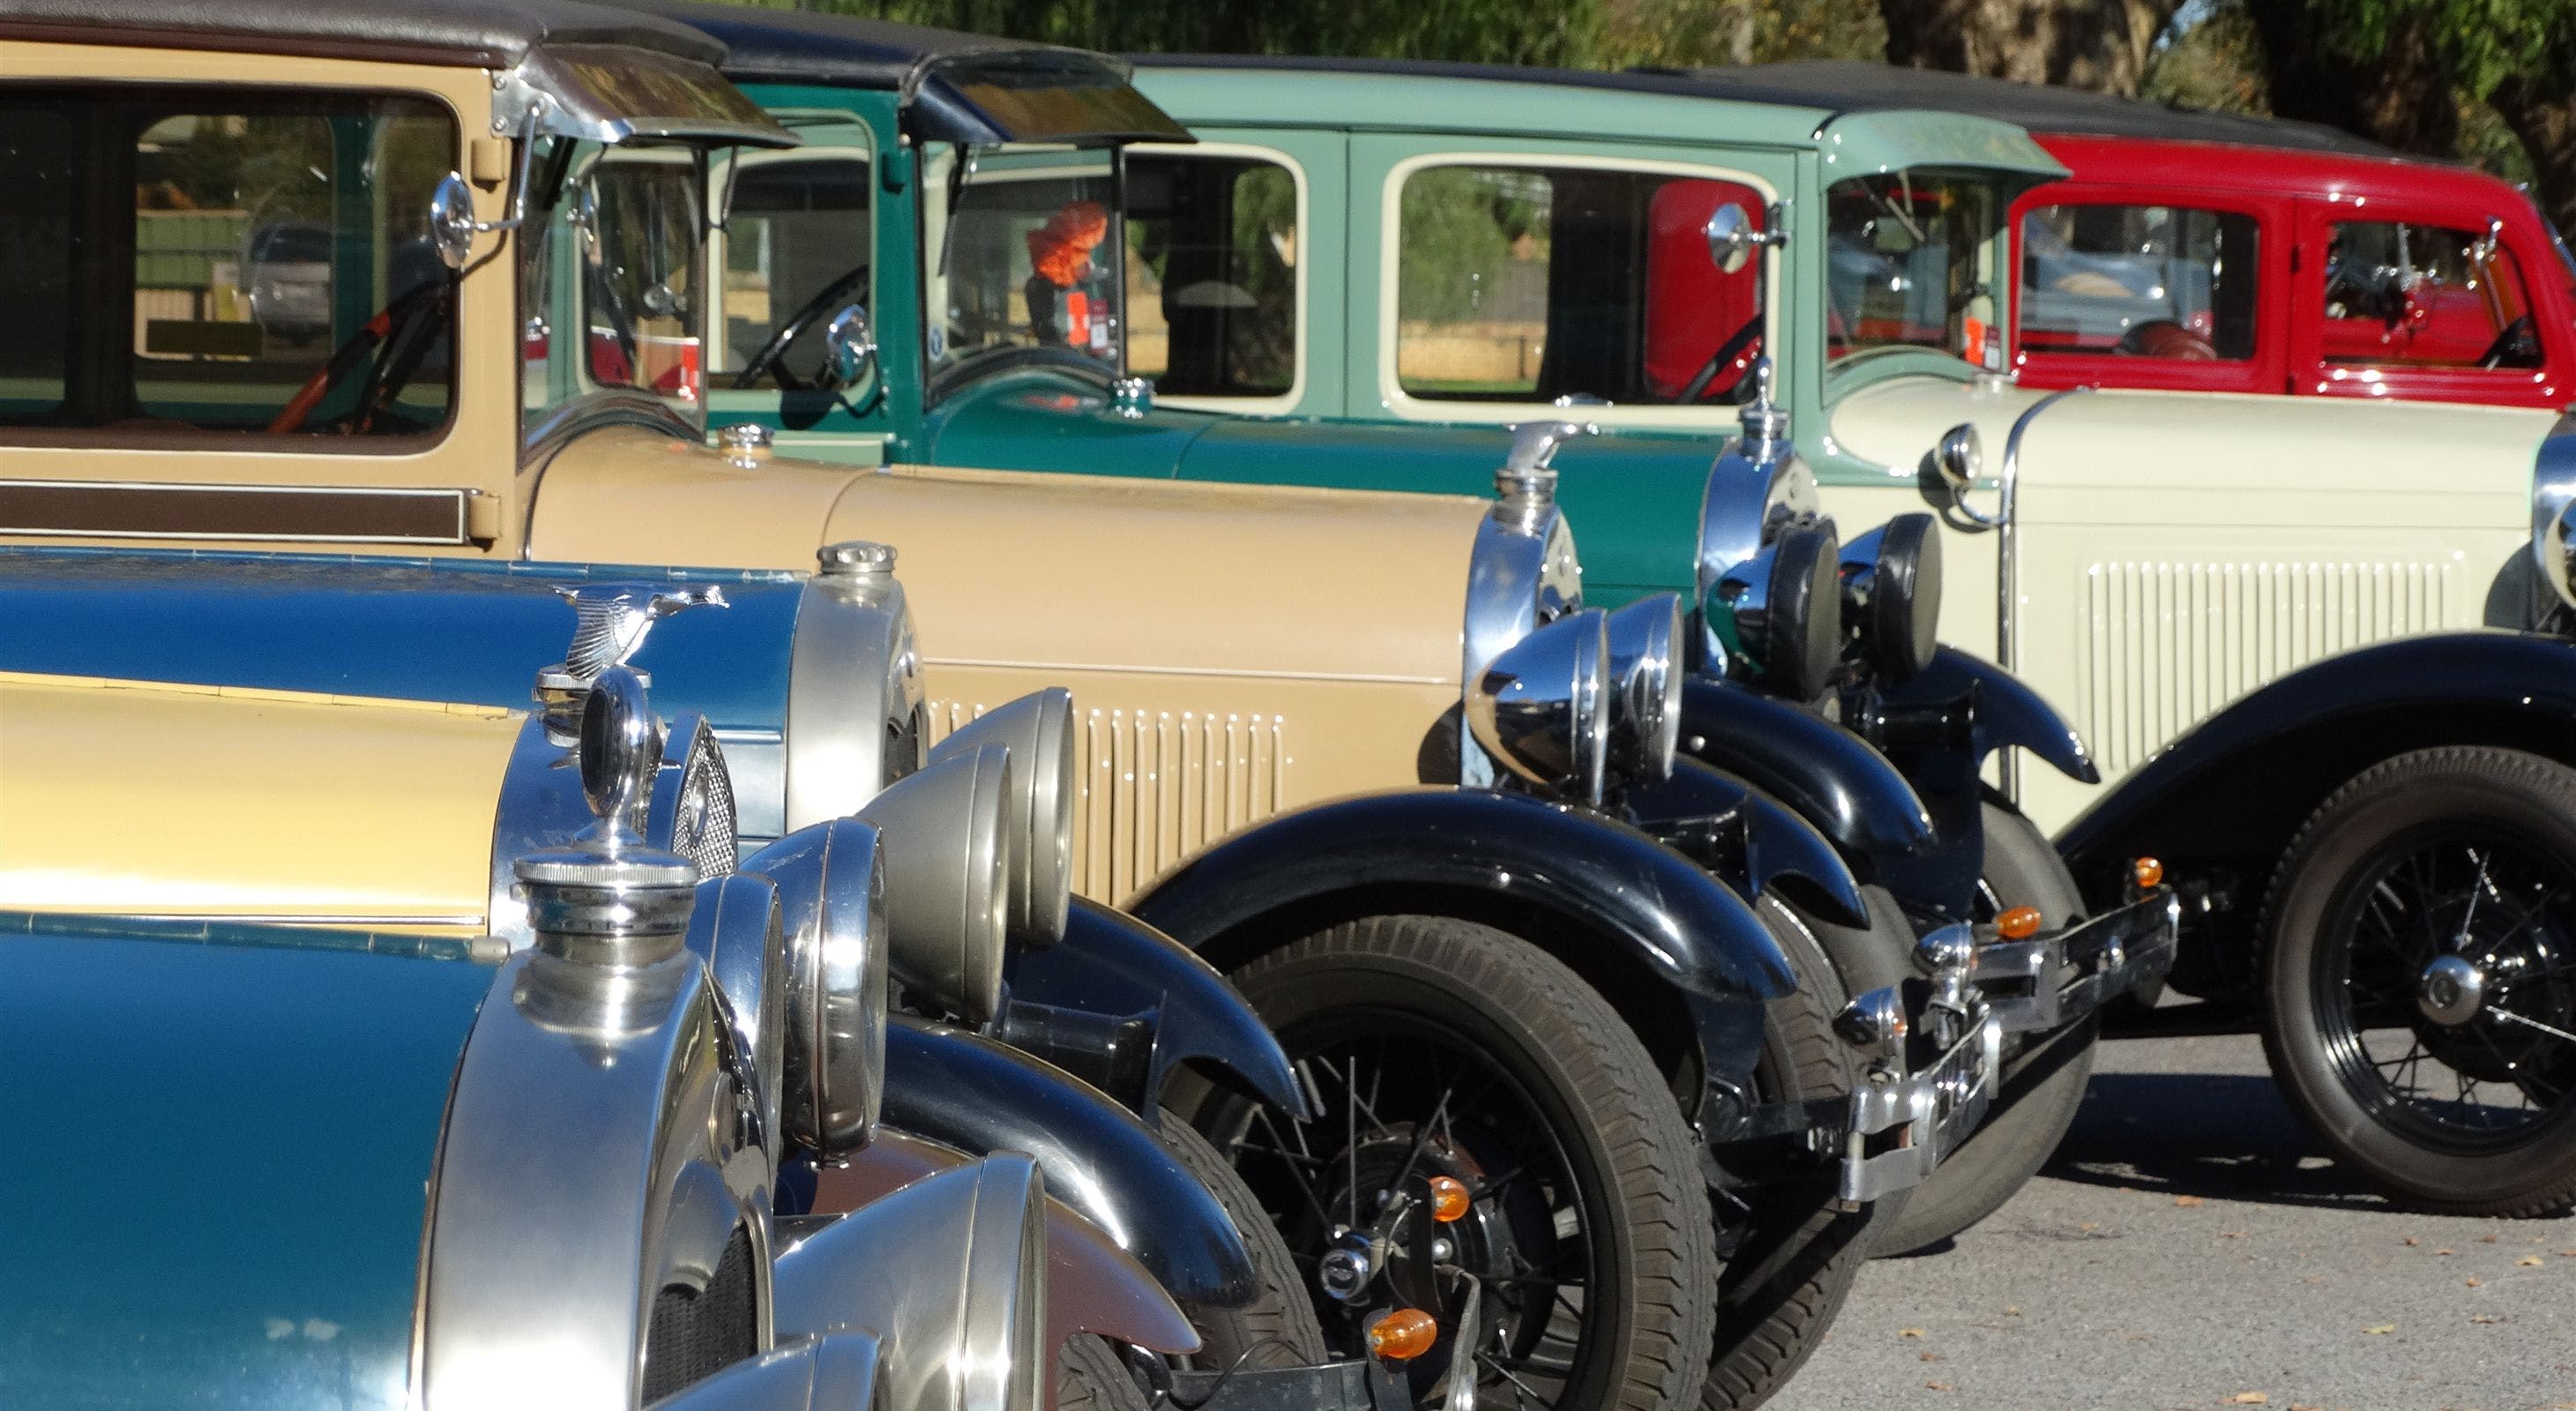 Queen's Birthday Car Rally - Broome Tourism